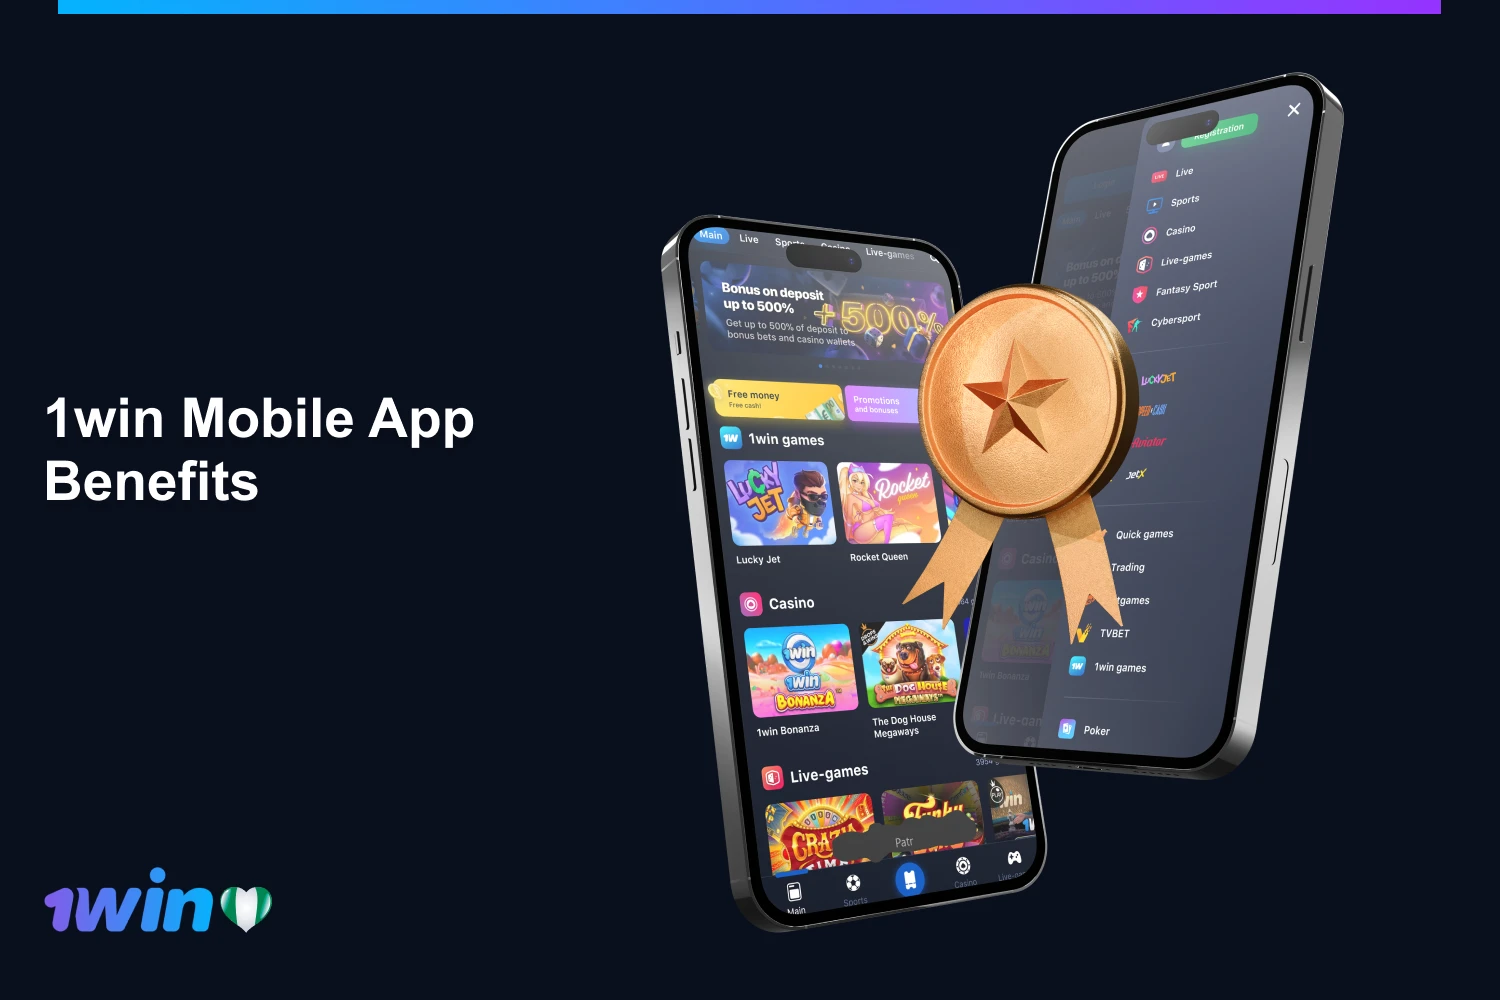 The 1win mobile app is identical to the desktop site, so Nigerians can watch live streaming here, spin slots and more